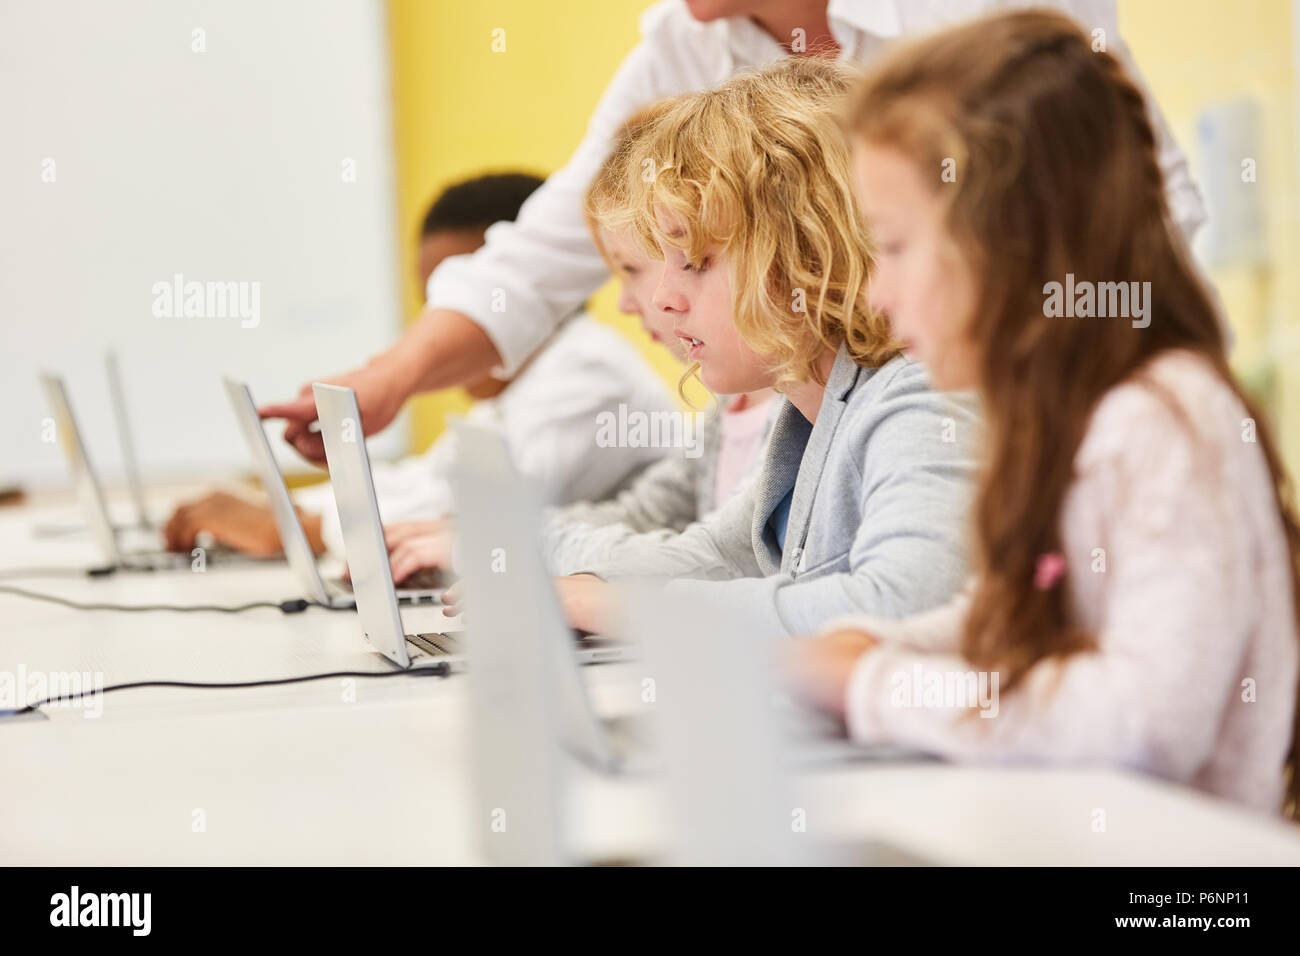 Children learn together Computer science in the computer. Elementary school lessons Stock Photo